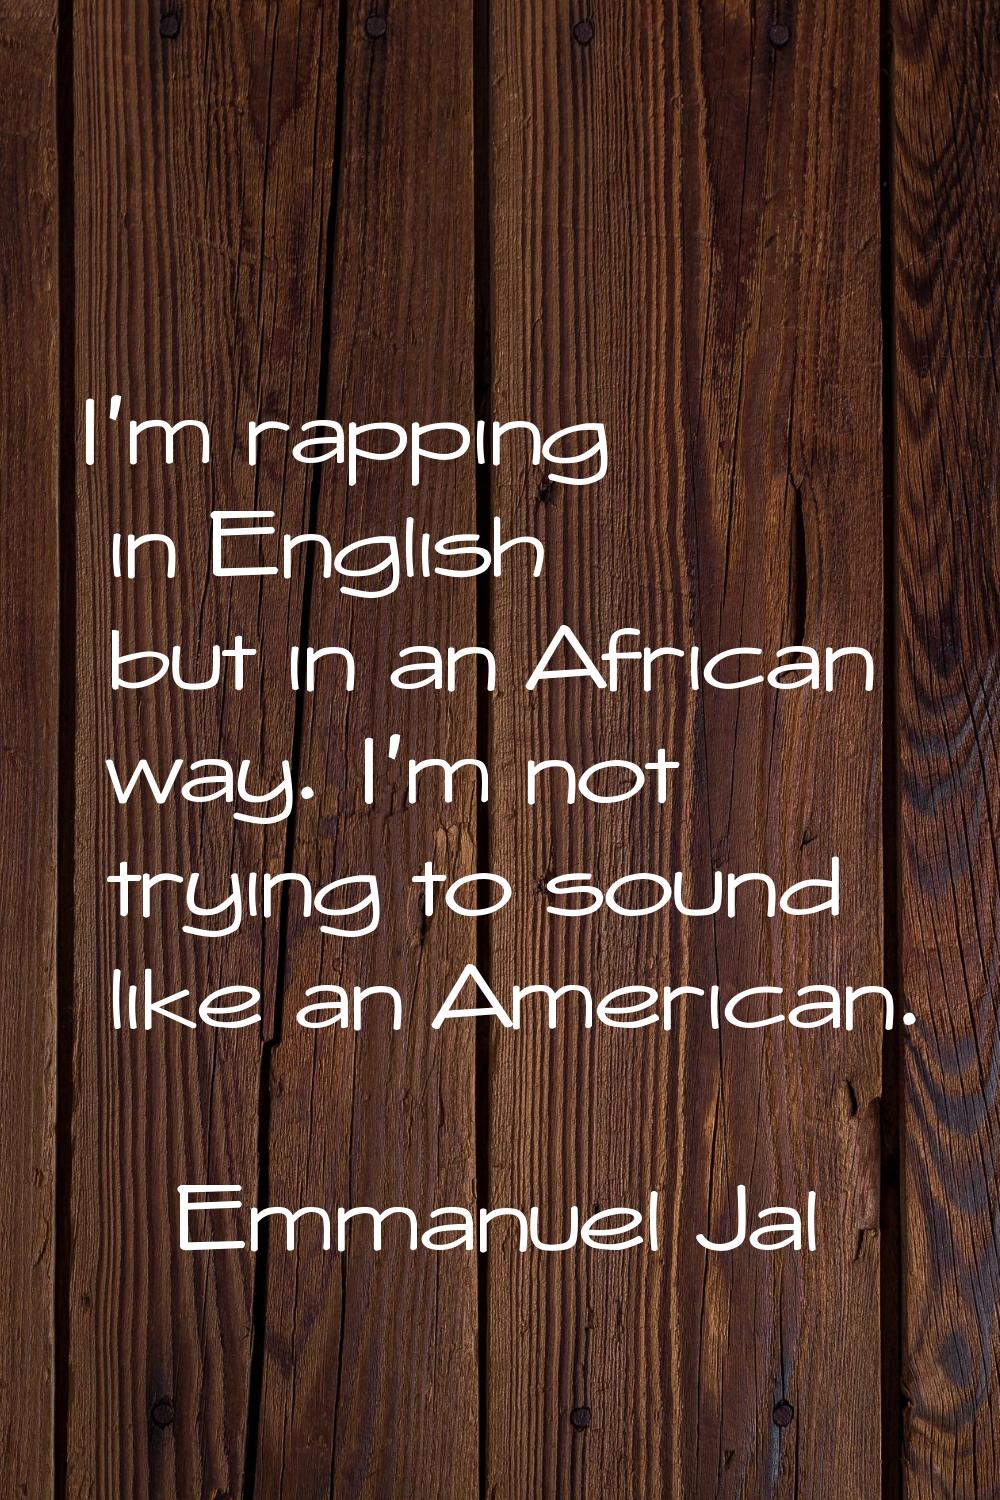 I'm rapping in English but in an African way. I'm not trying to sound like an American.